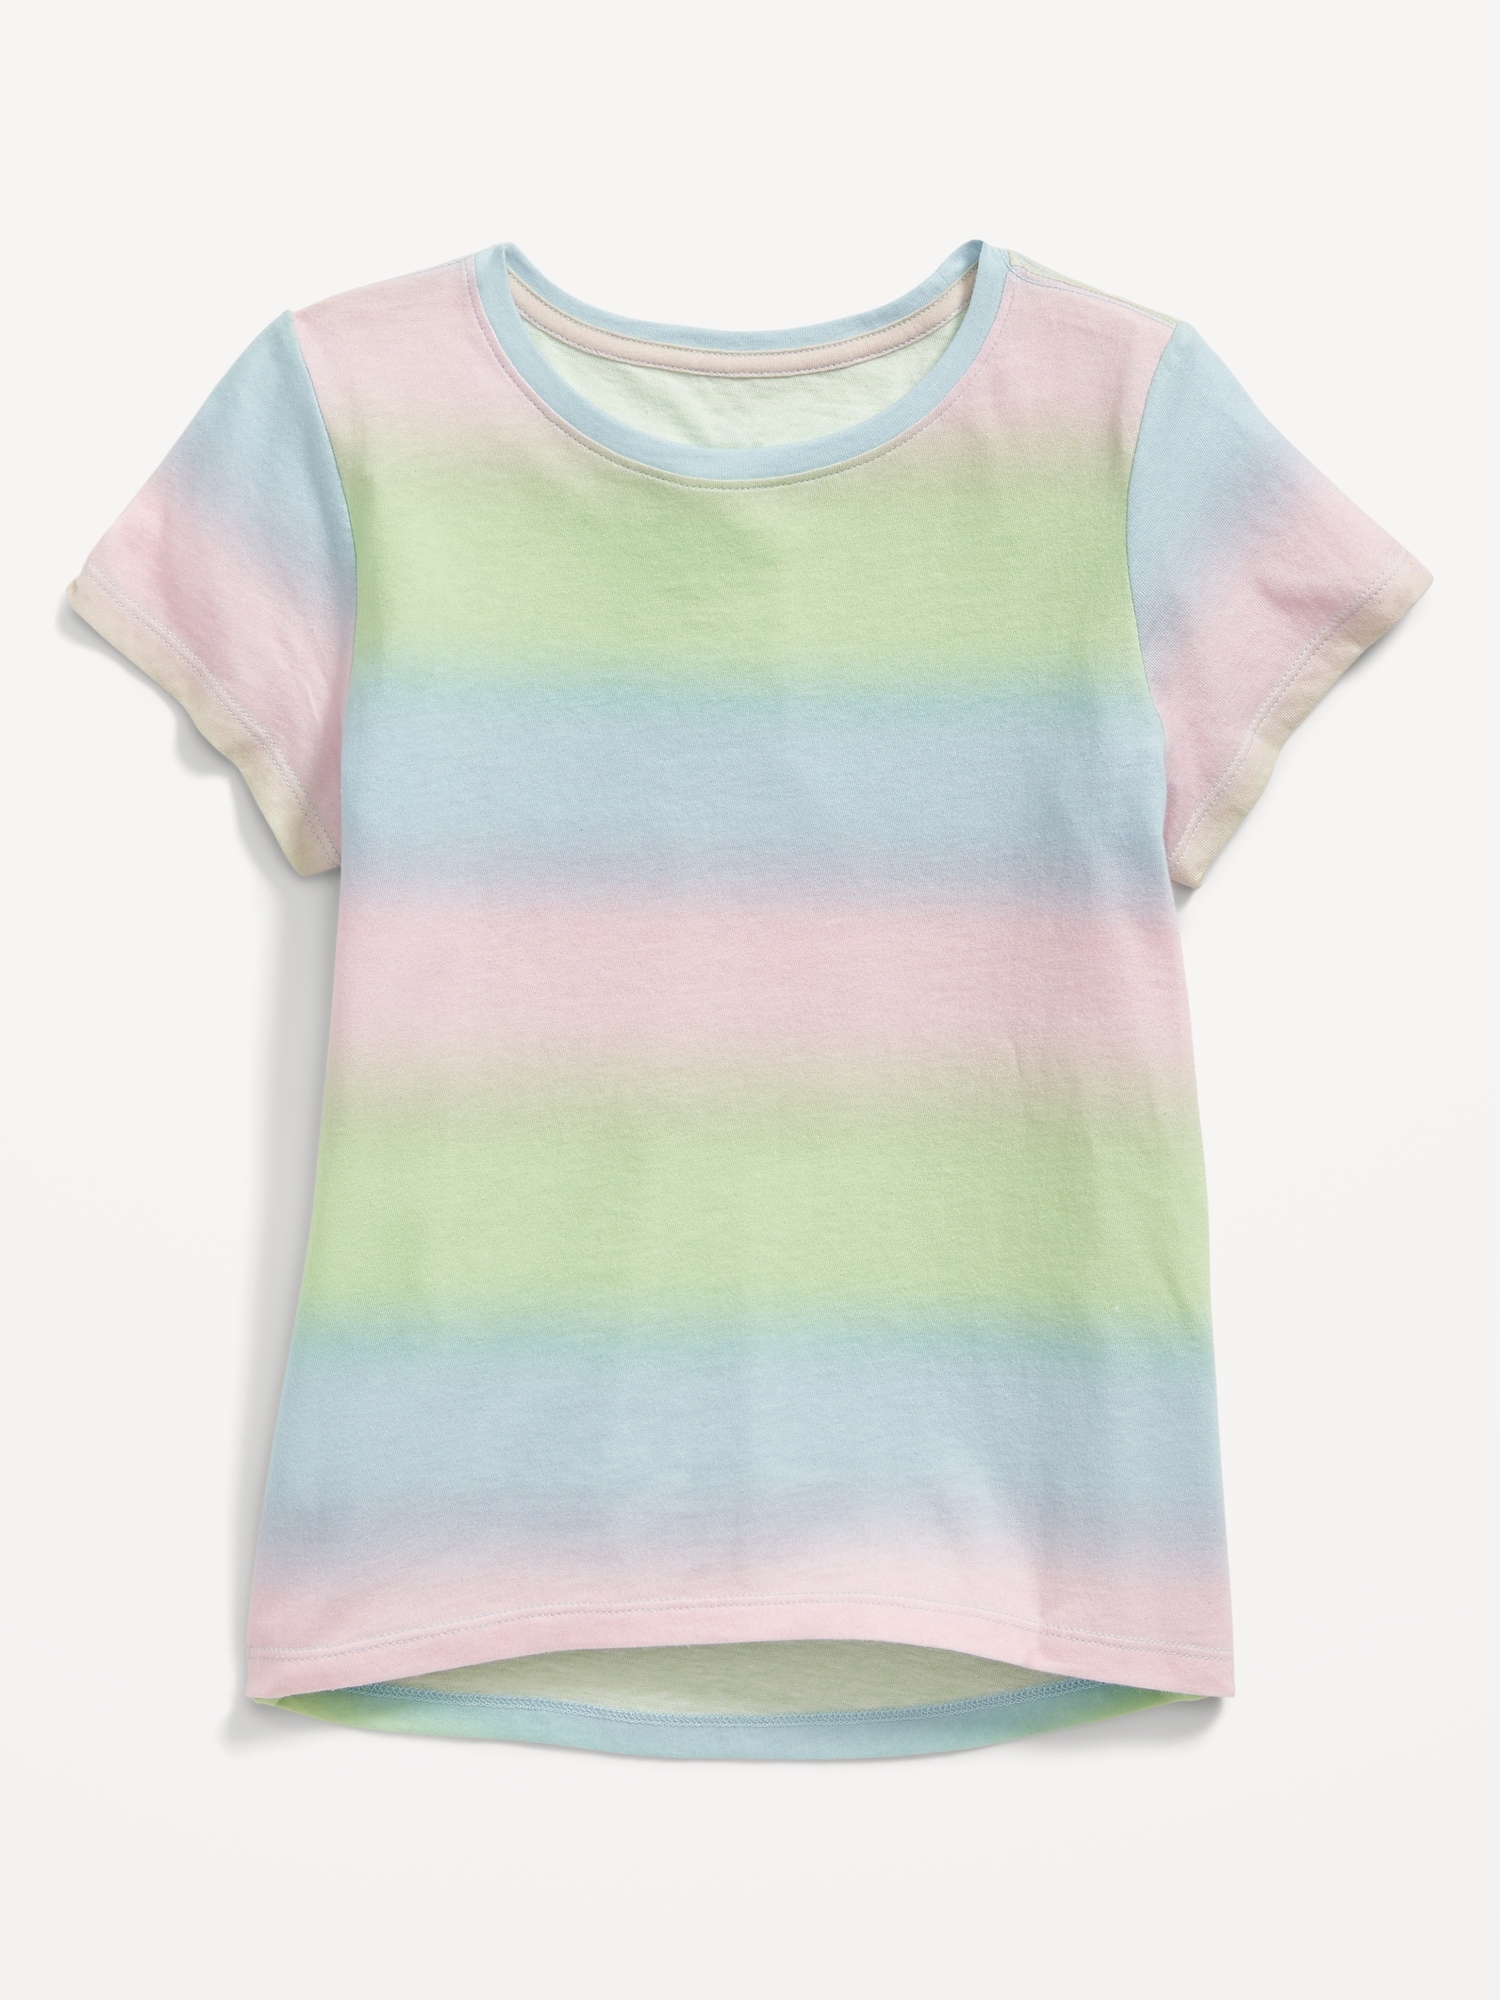 Old Navy Softest Printed T-Shirt for Girls blue. 1